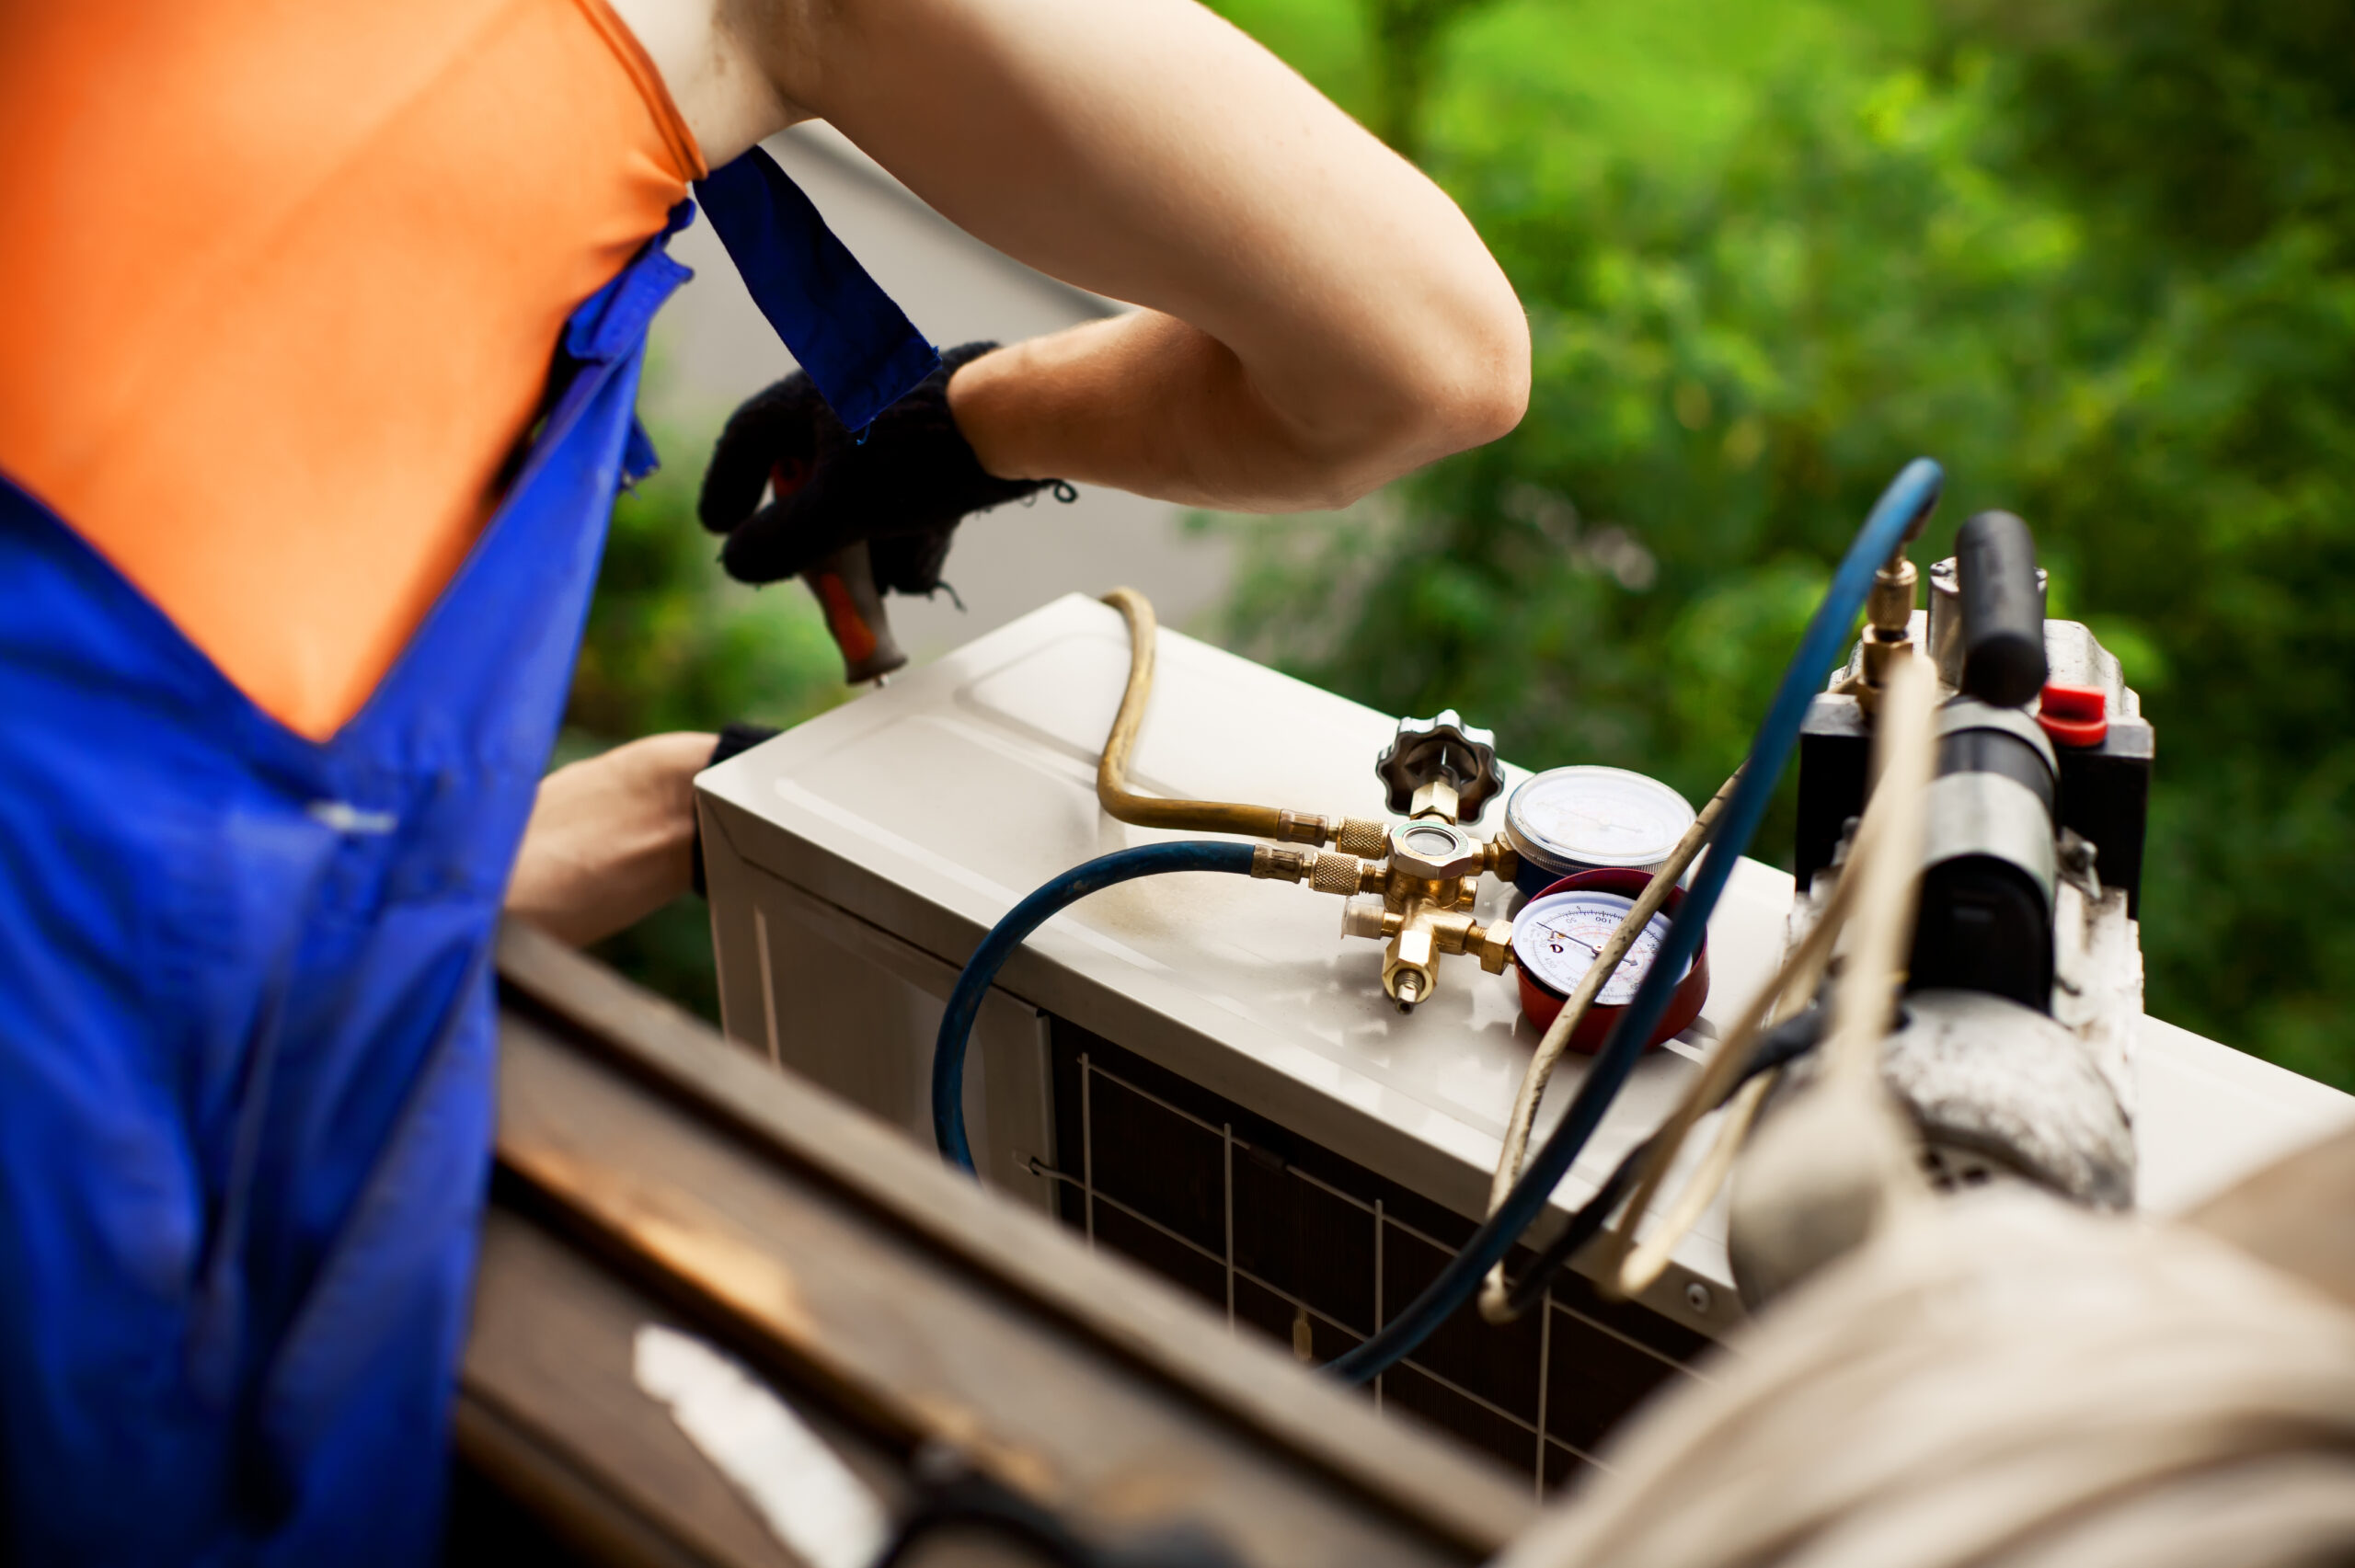 A person working on an air conditioner unit.